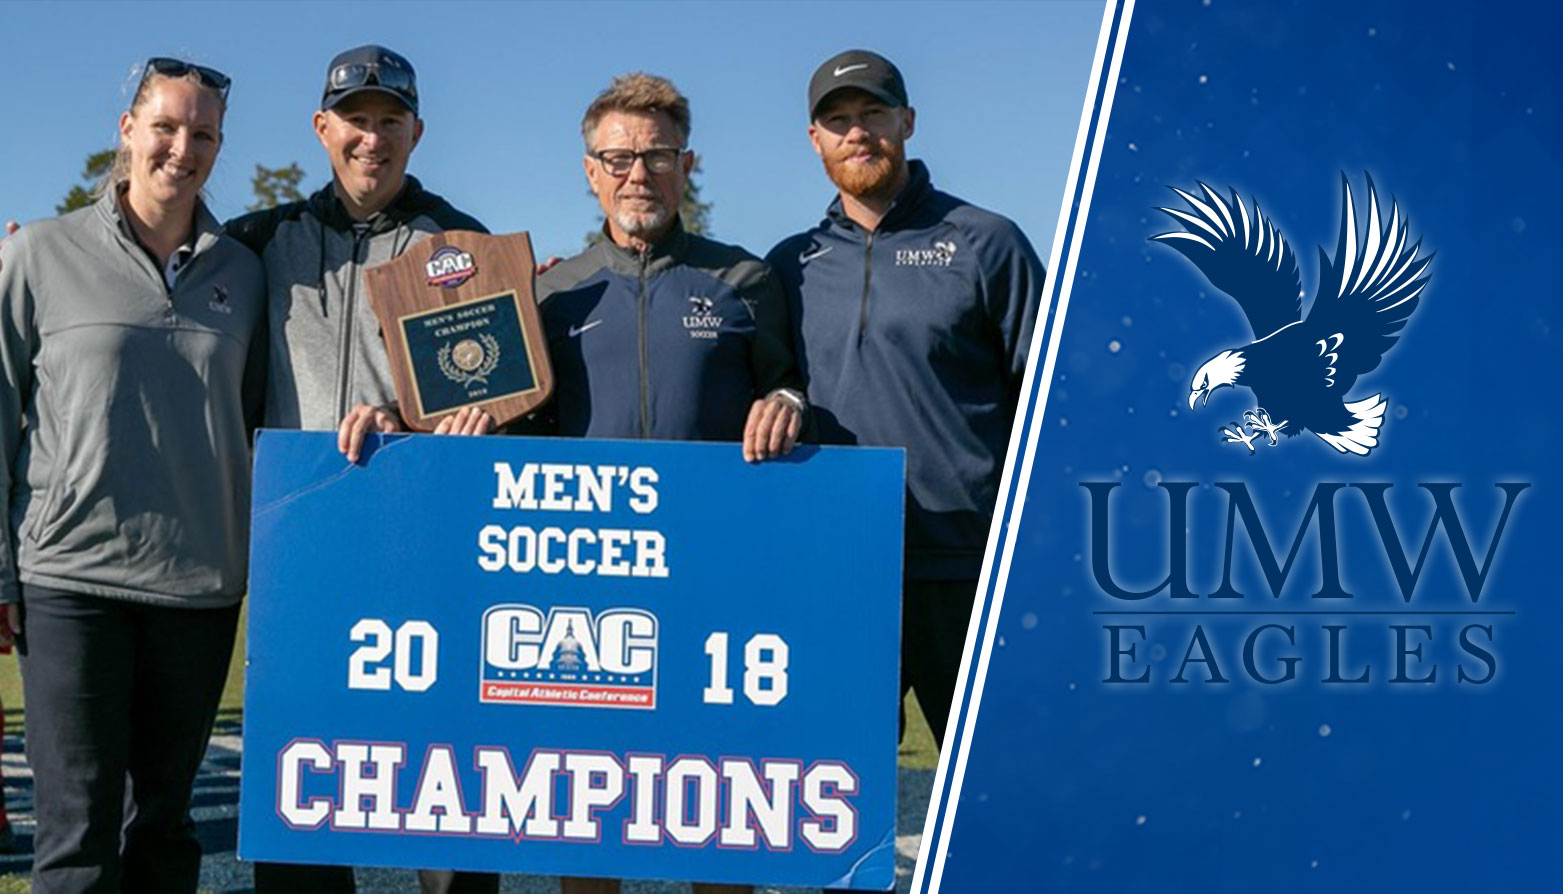 Kilby, UMW Men's Soccer Staff Named South Atlantic Region Staff of the Year by United Soccer Coaches